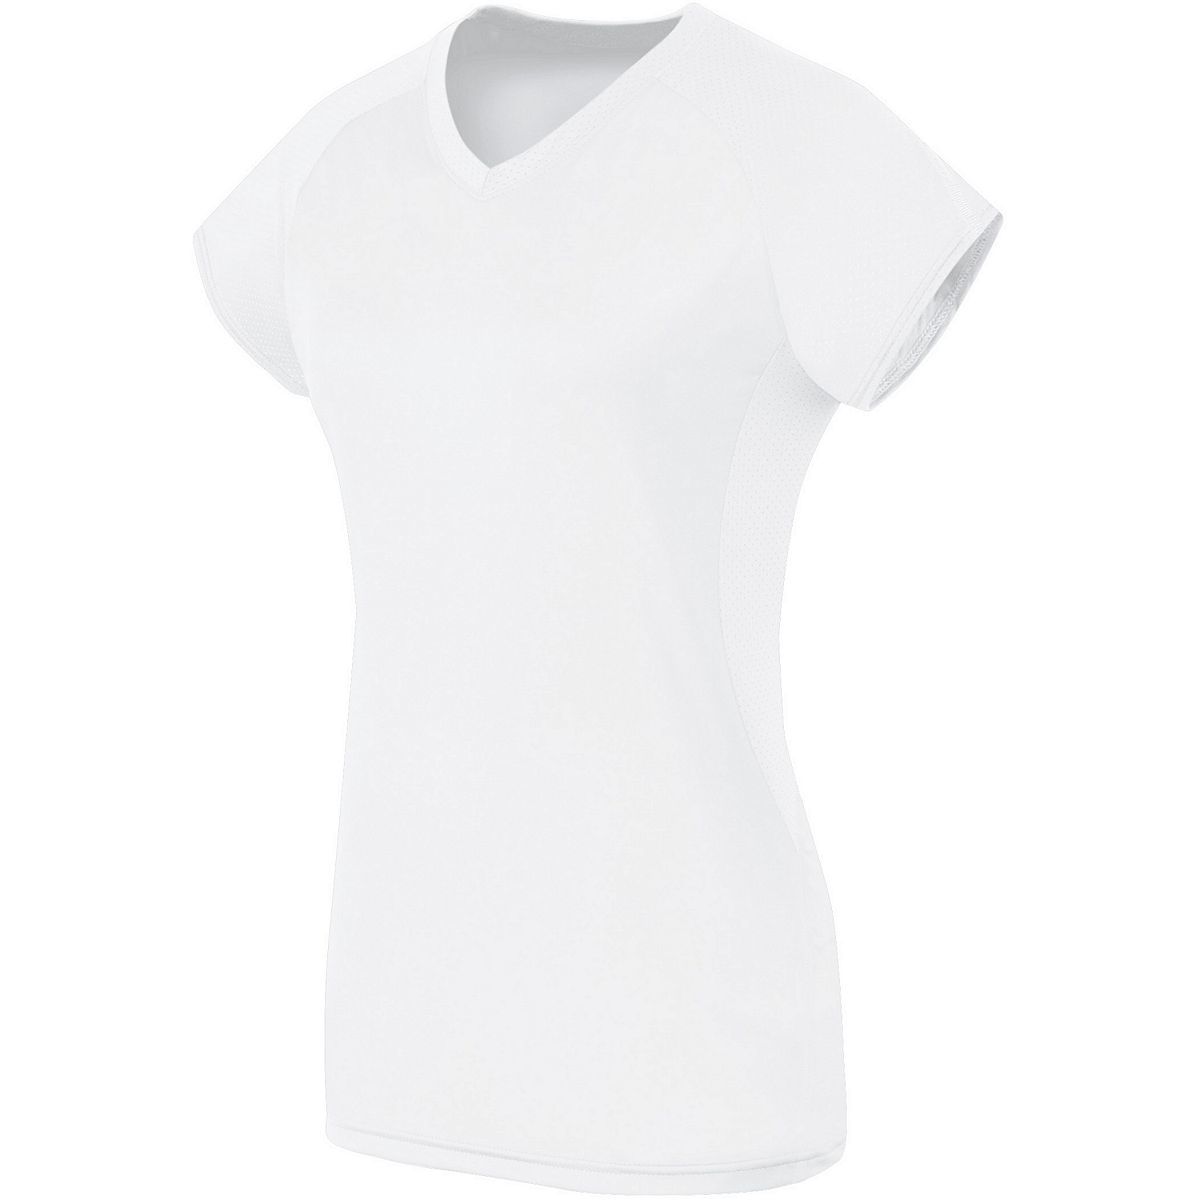 High 5 Ladies Short Sleeve Solid Jersey in White/White  -Part of the Ladies, Ladies-Jersey, High5-Products, Volleyball, Shirts product lines at KanaleyCreations.com